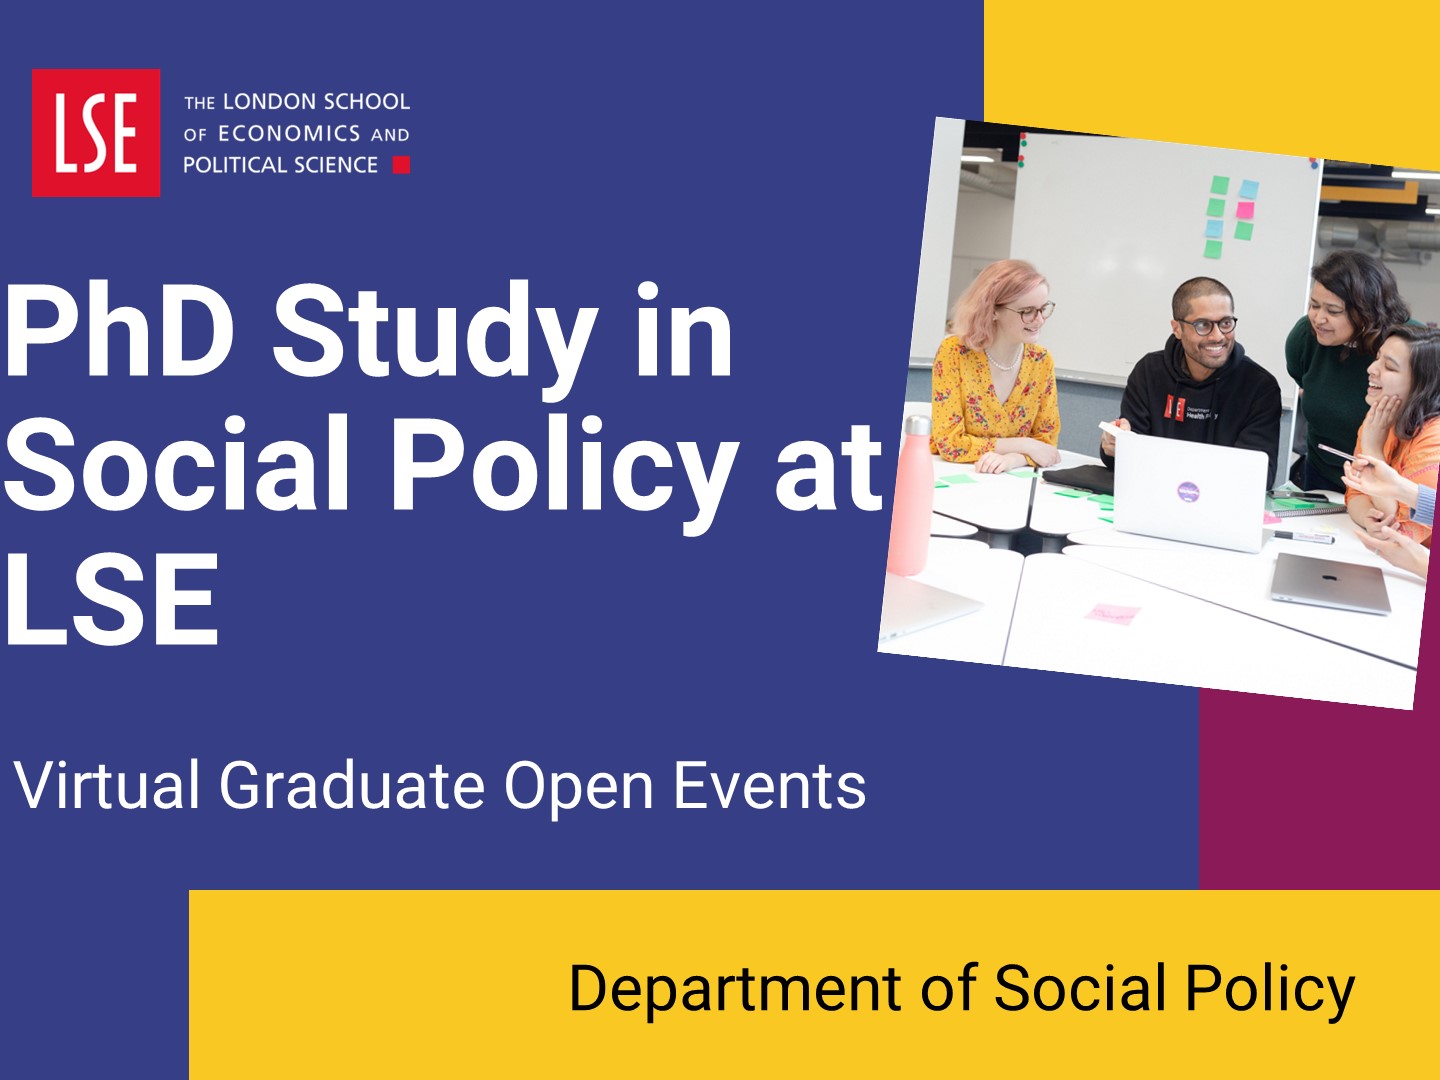 An introduction to PhD study in Social Policy at LSE